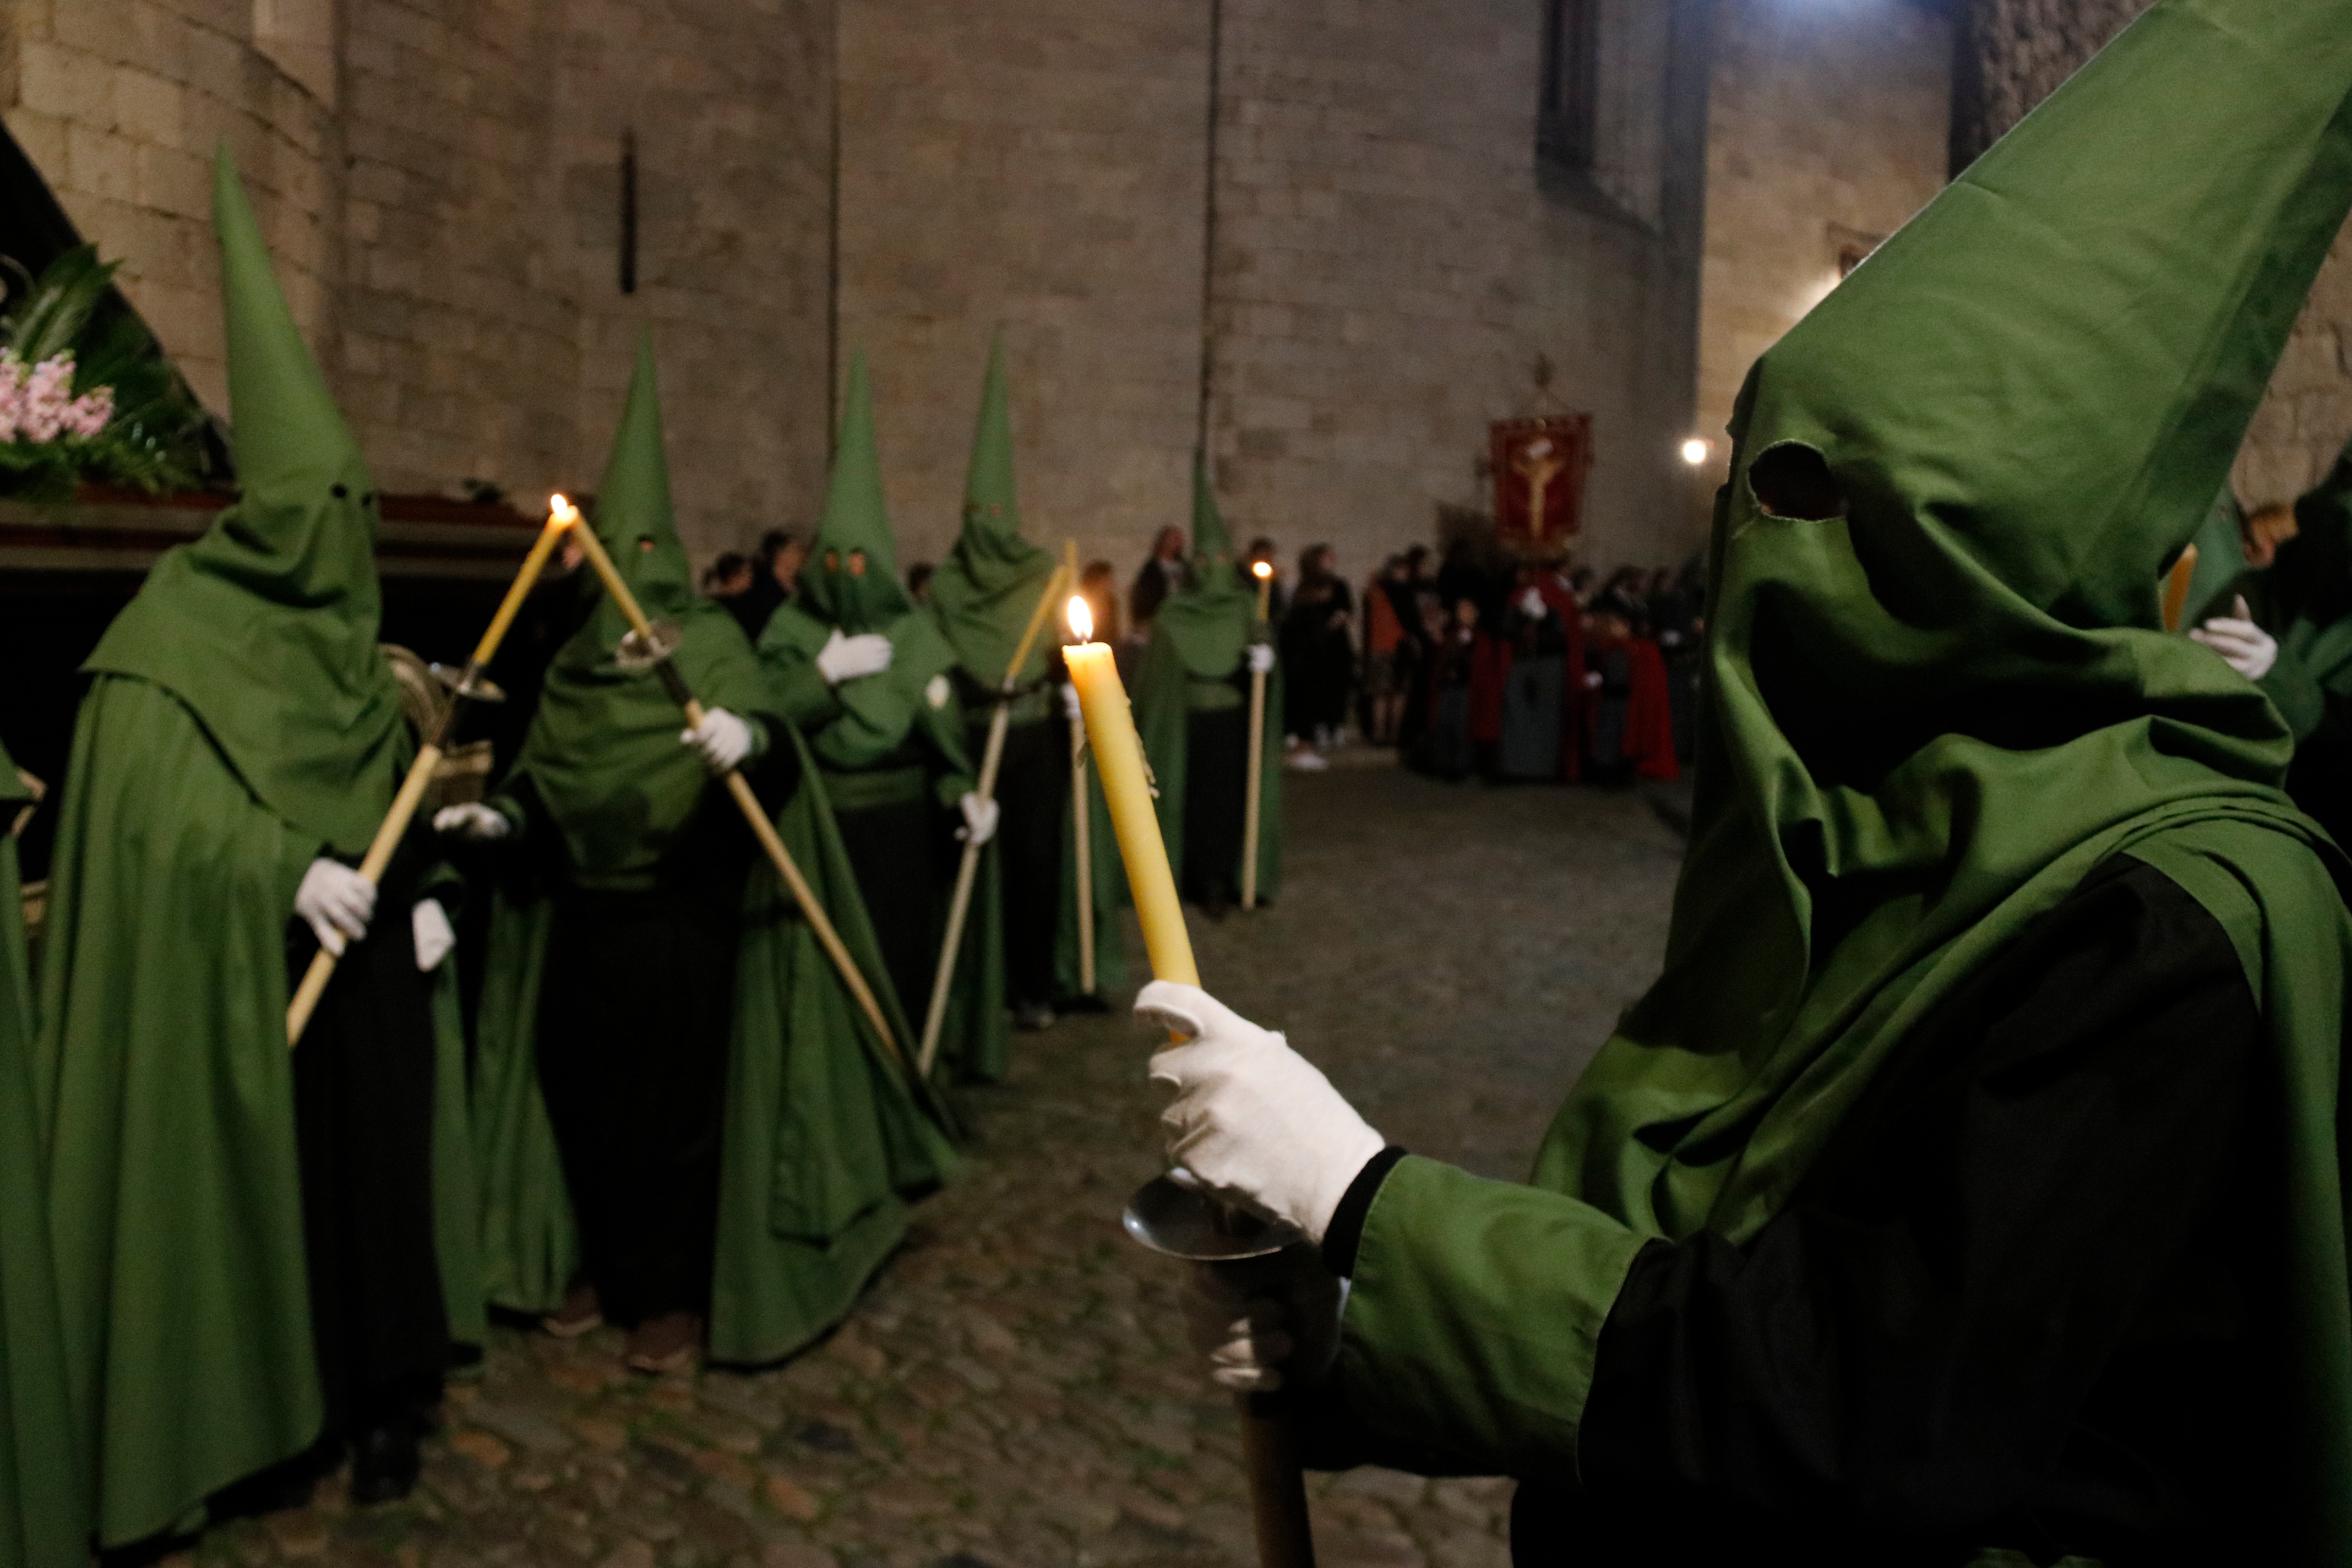 One of the confraternities in Girona holding candles during the procession on 2022 Good Friday